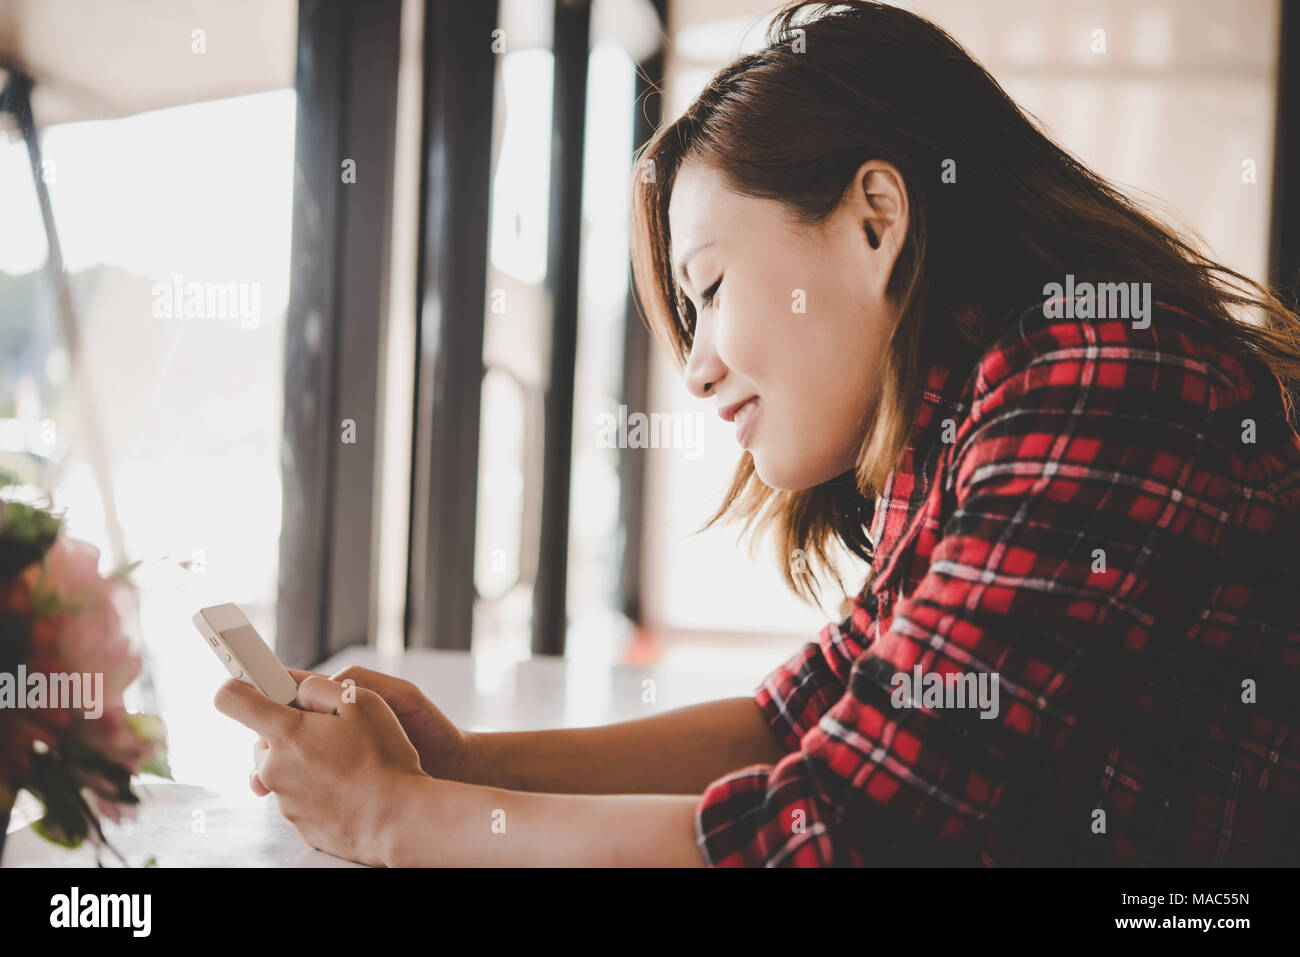 Close up of woman smiling while holding cell phone and texing. Stock Photo